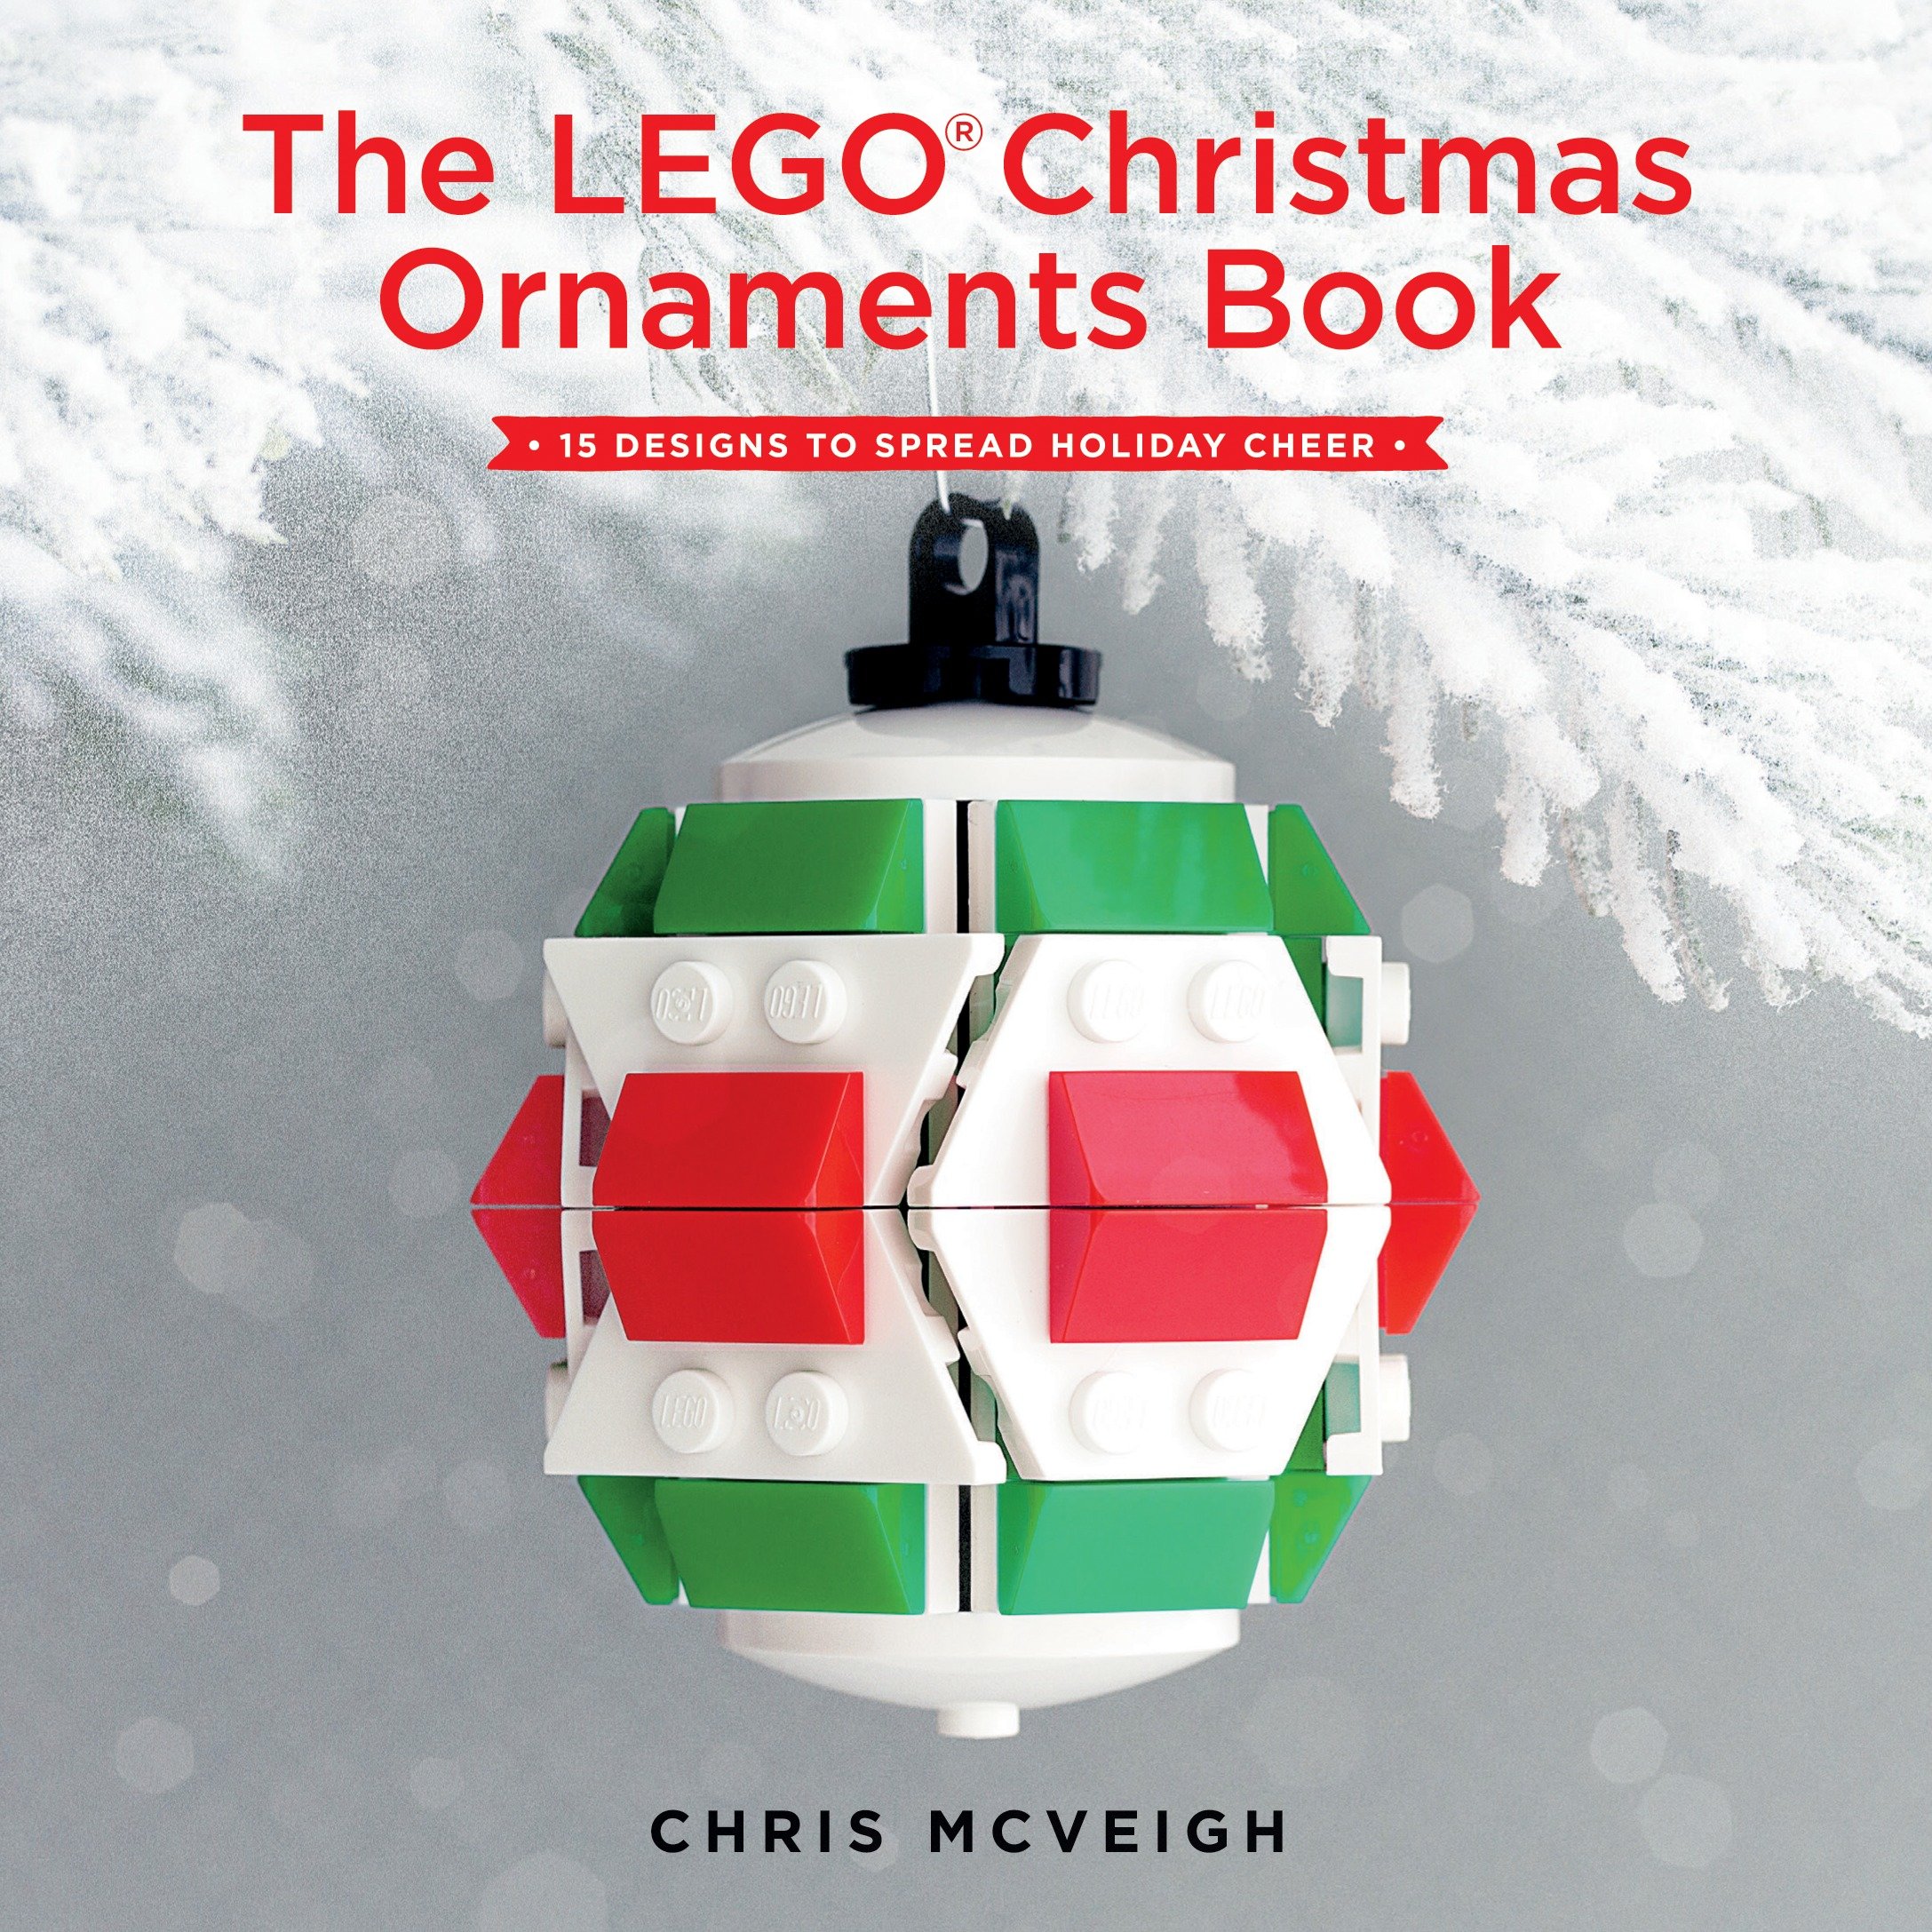 The Lego Christmas Ornaments Book (Hardcover Book)